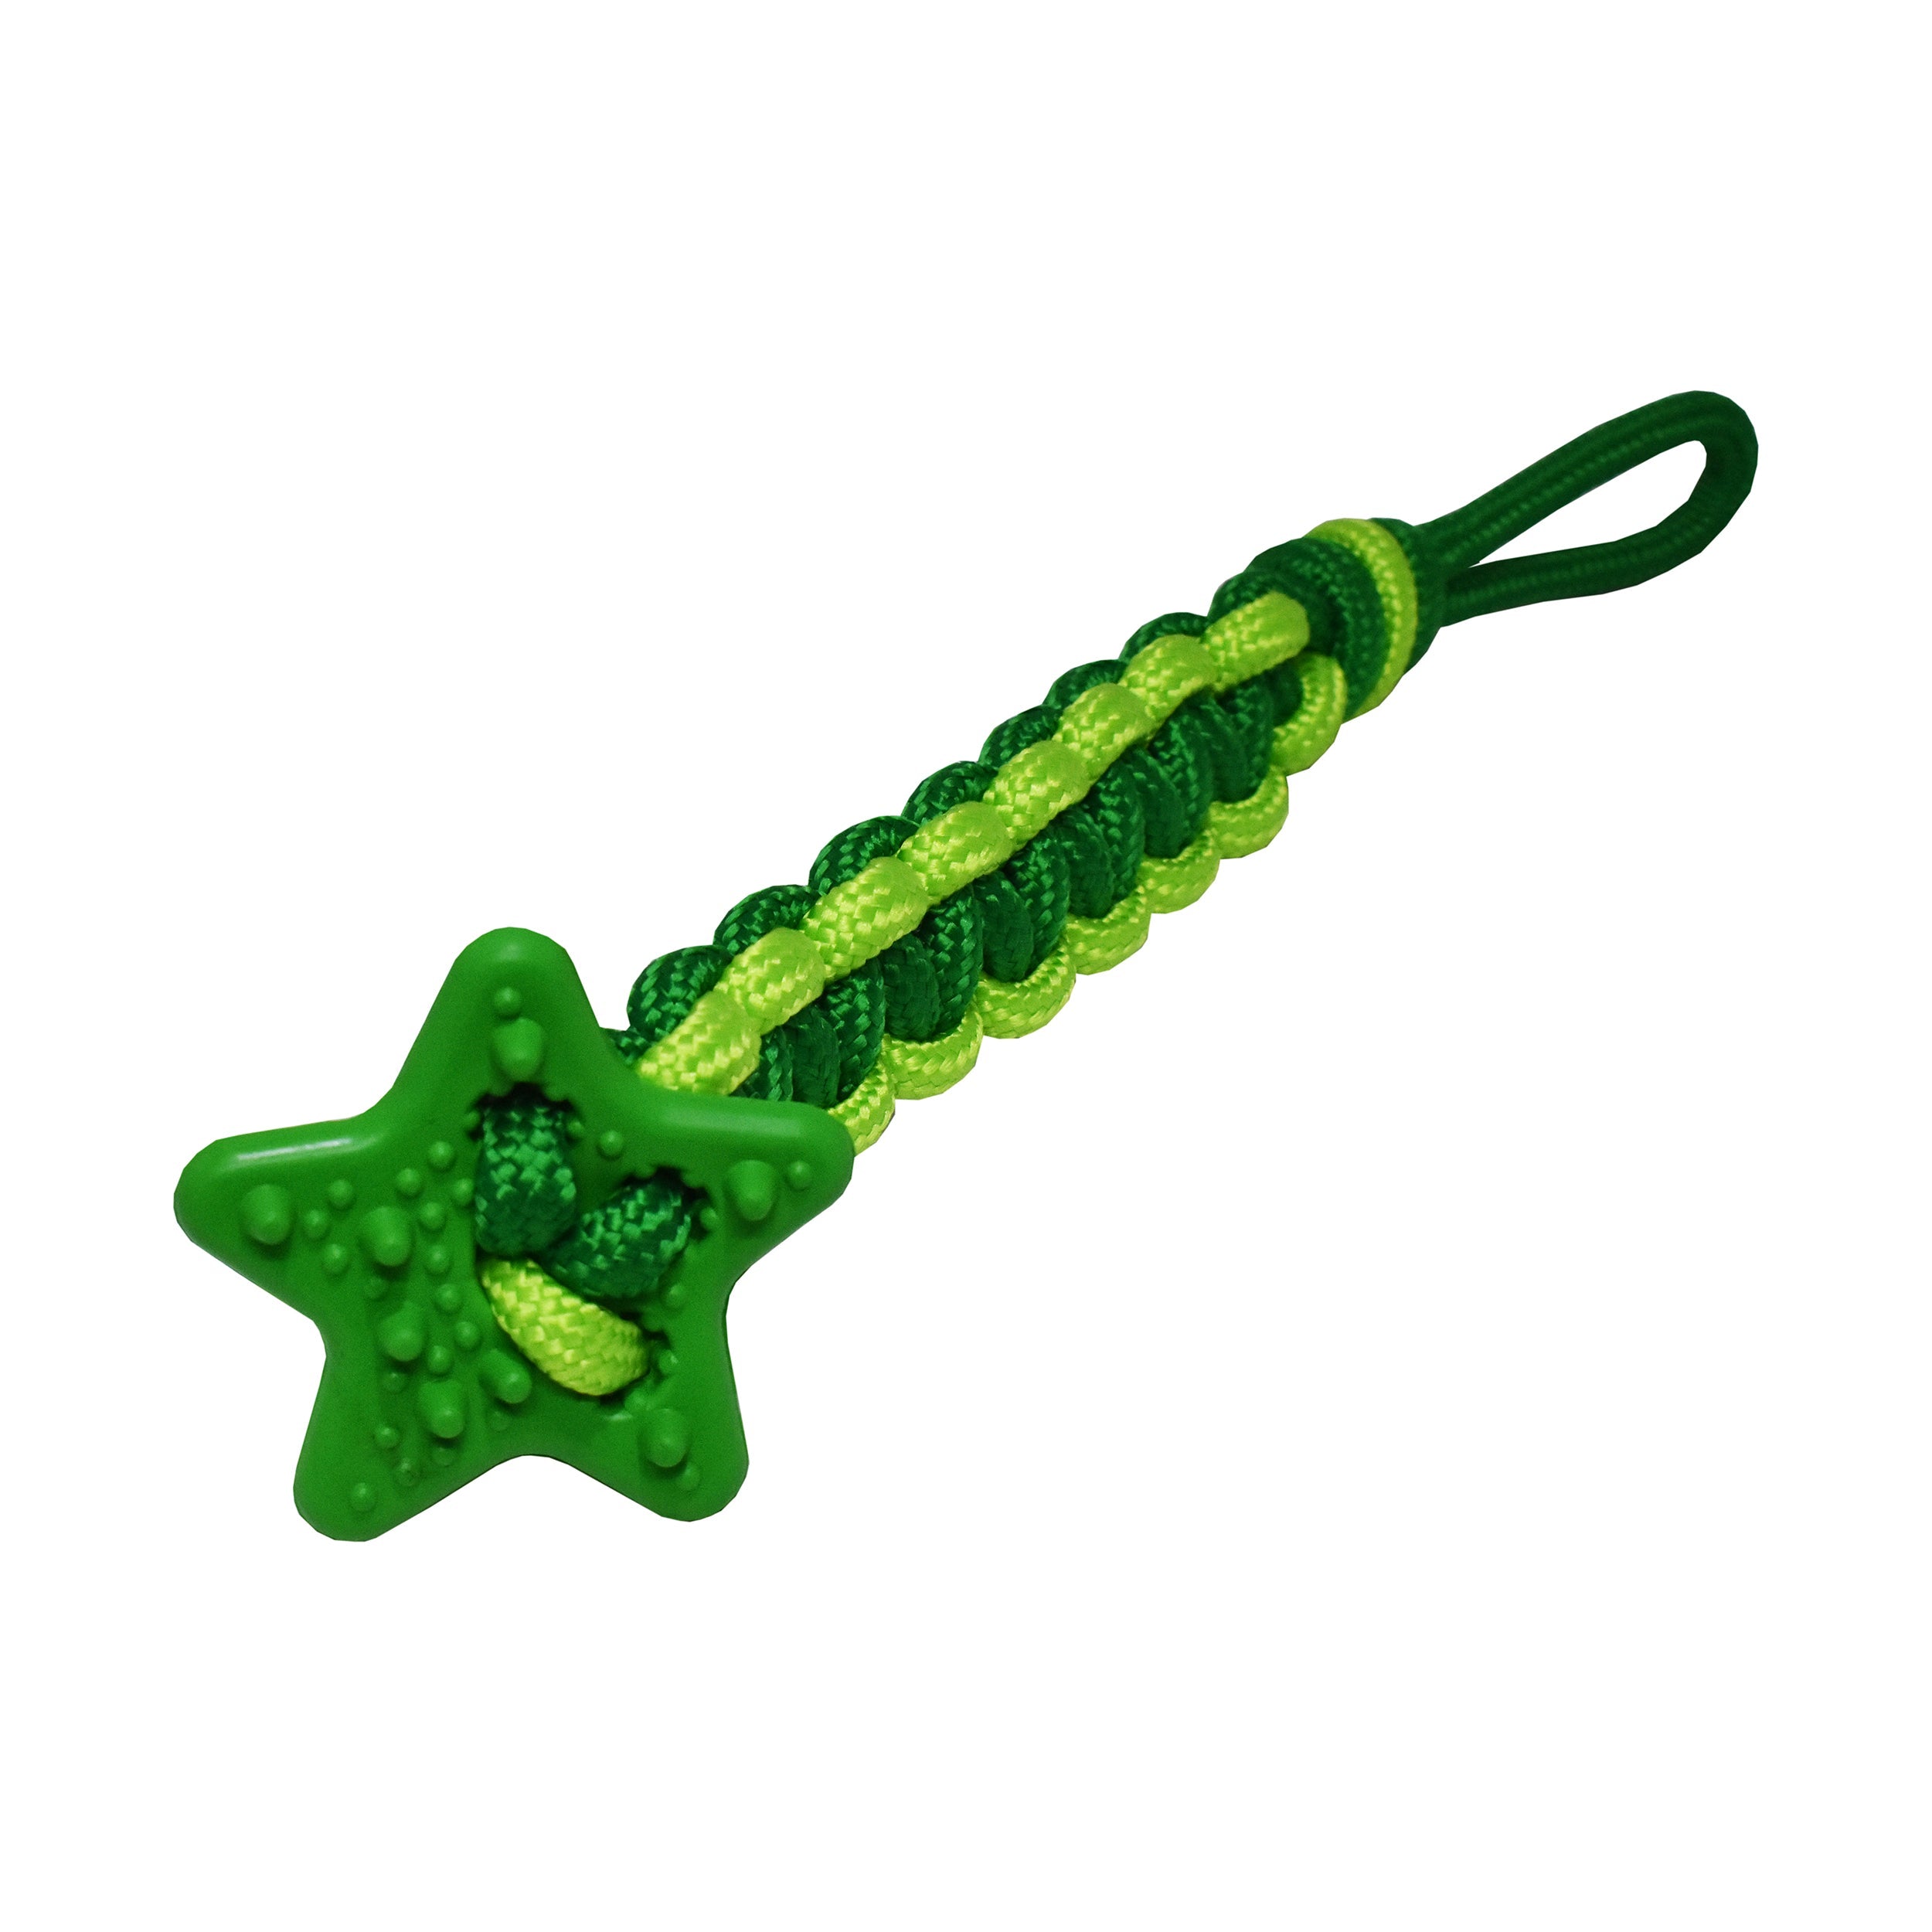 JOHN DEERE DOG TUG TOY. SHOVEL Shaped Toy with inner Squeaker. TOUGH,  STURDY PET TOY with John Deere Logo. BEST DOG DIGGING TOY for DOG OWNERS